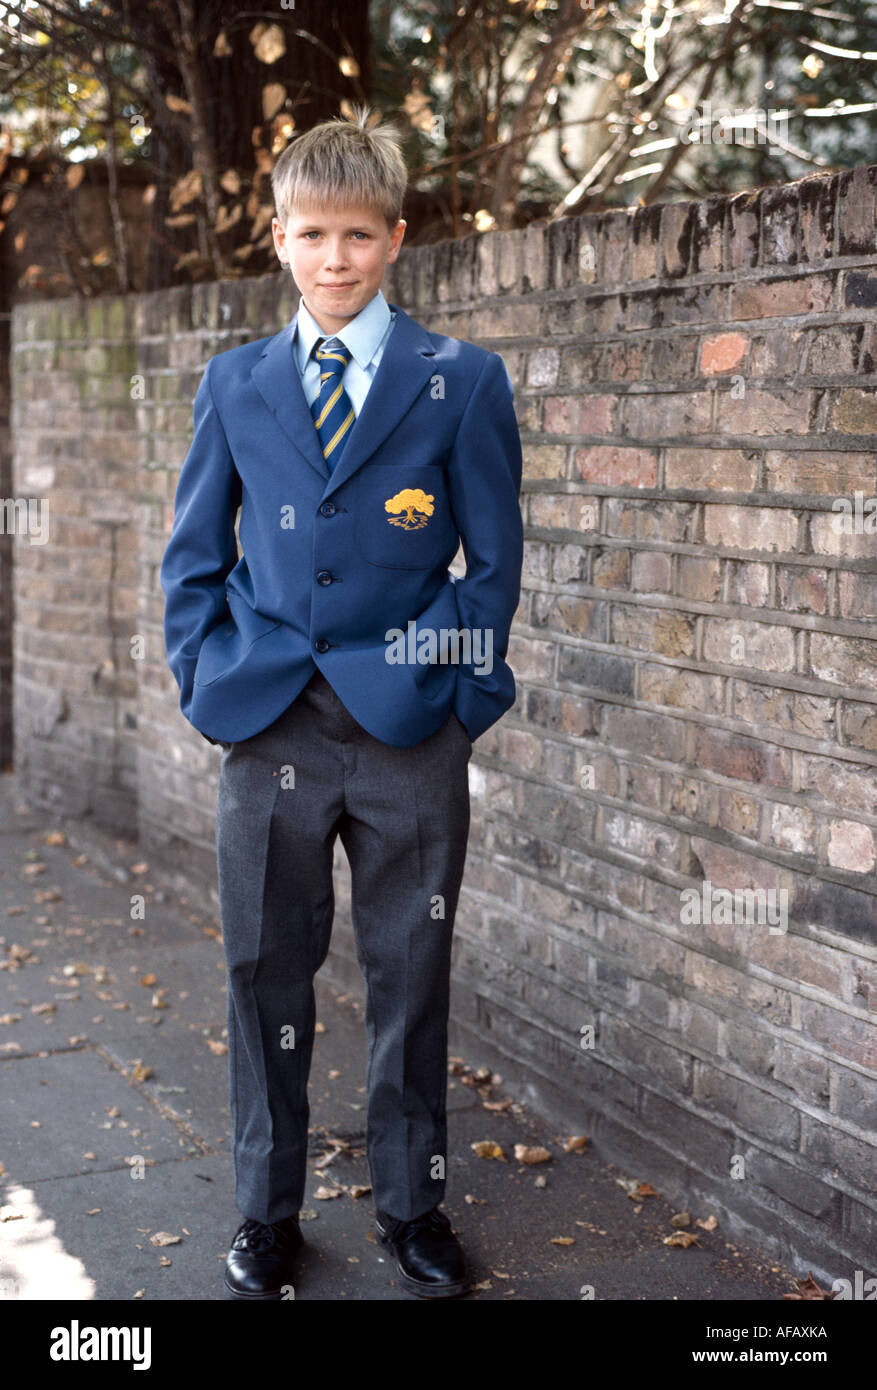 boy-in-uniform-going-to-his-first-day-at-school-AFAXKA.jpg